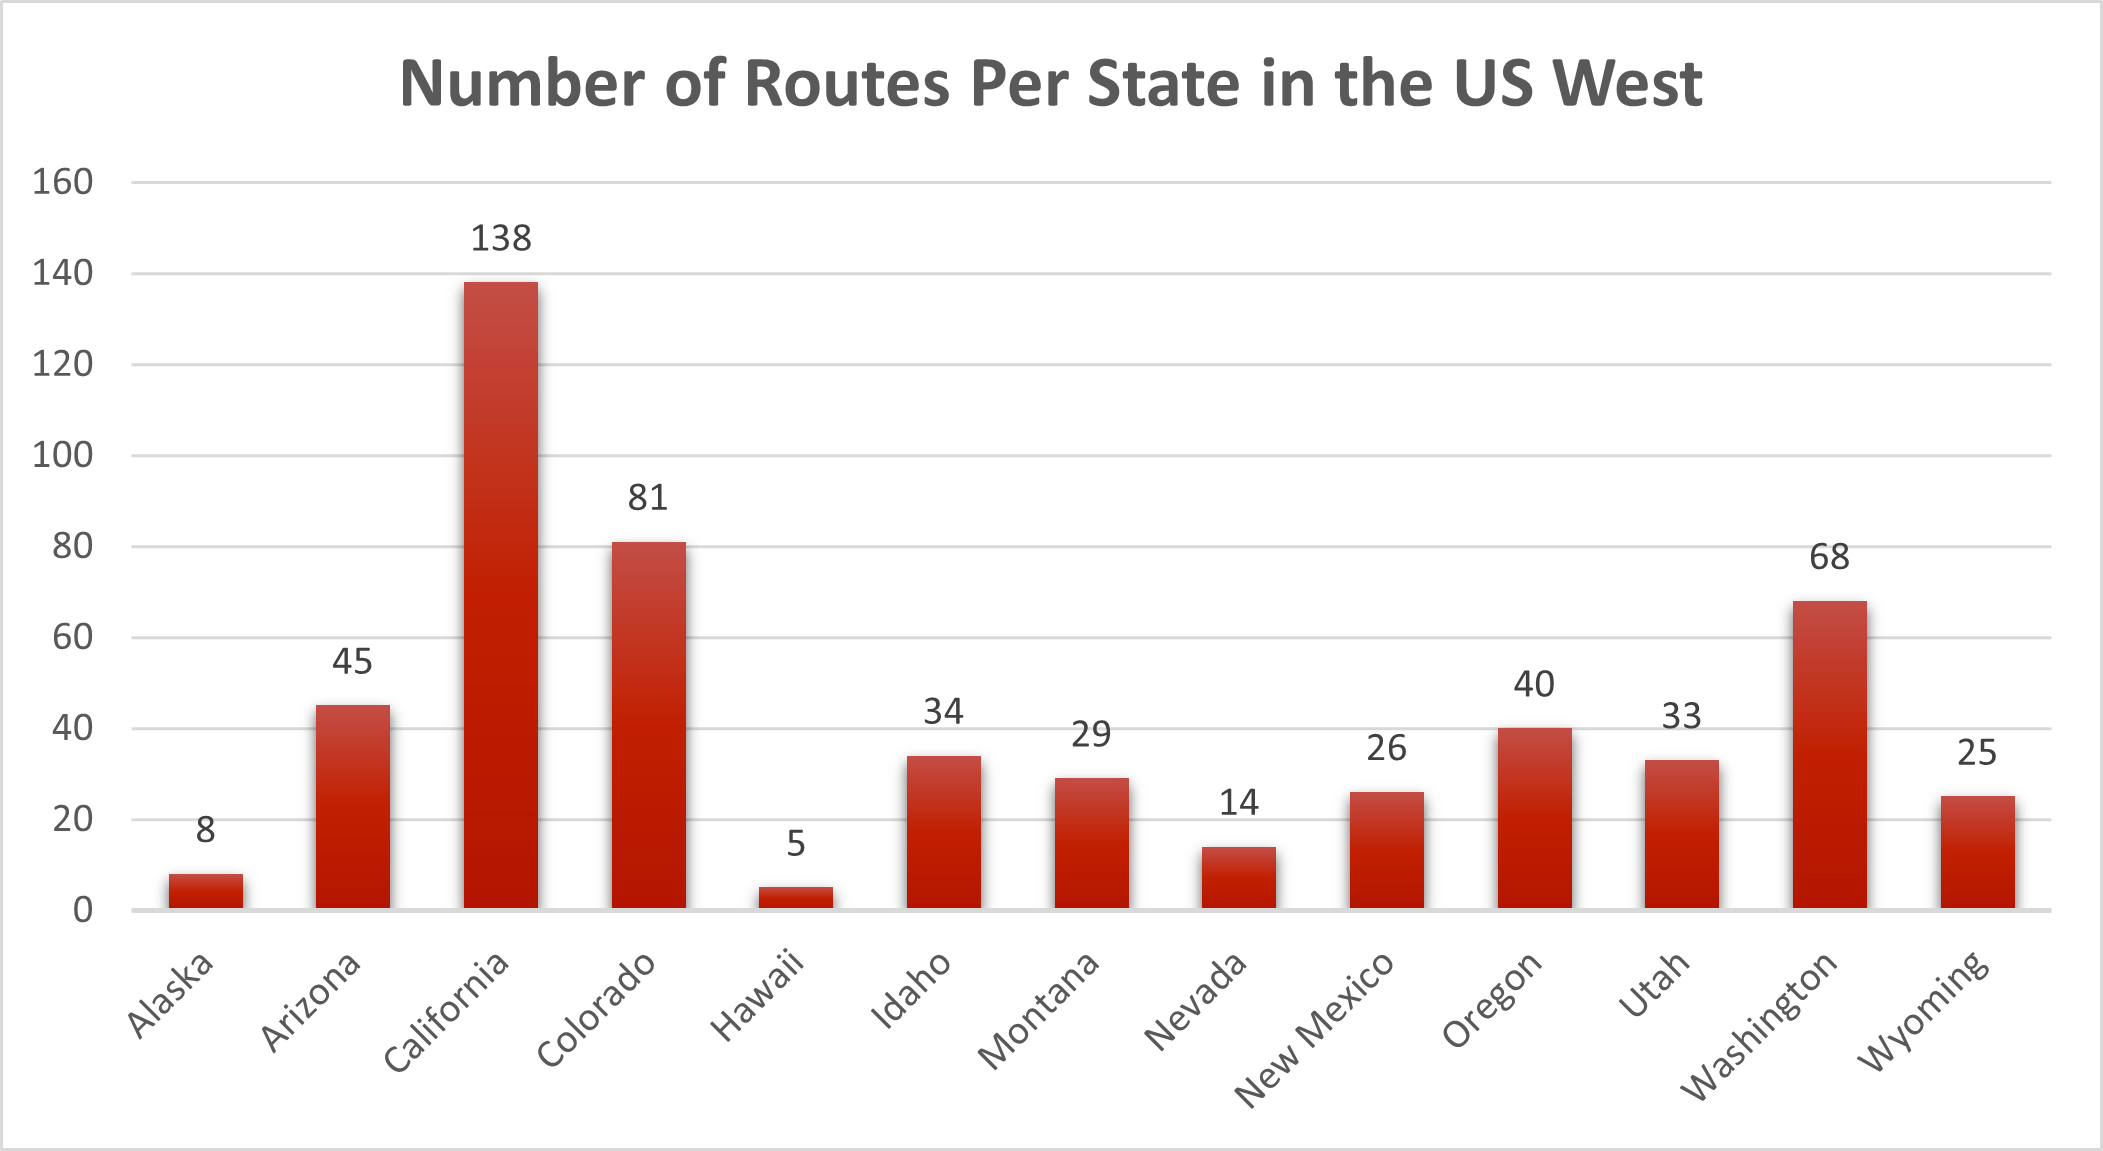 The US west has a lot of great registered motorcycle roads within its states